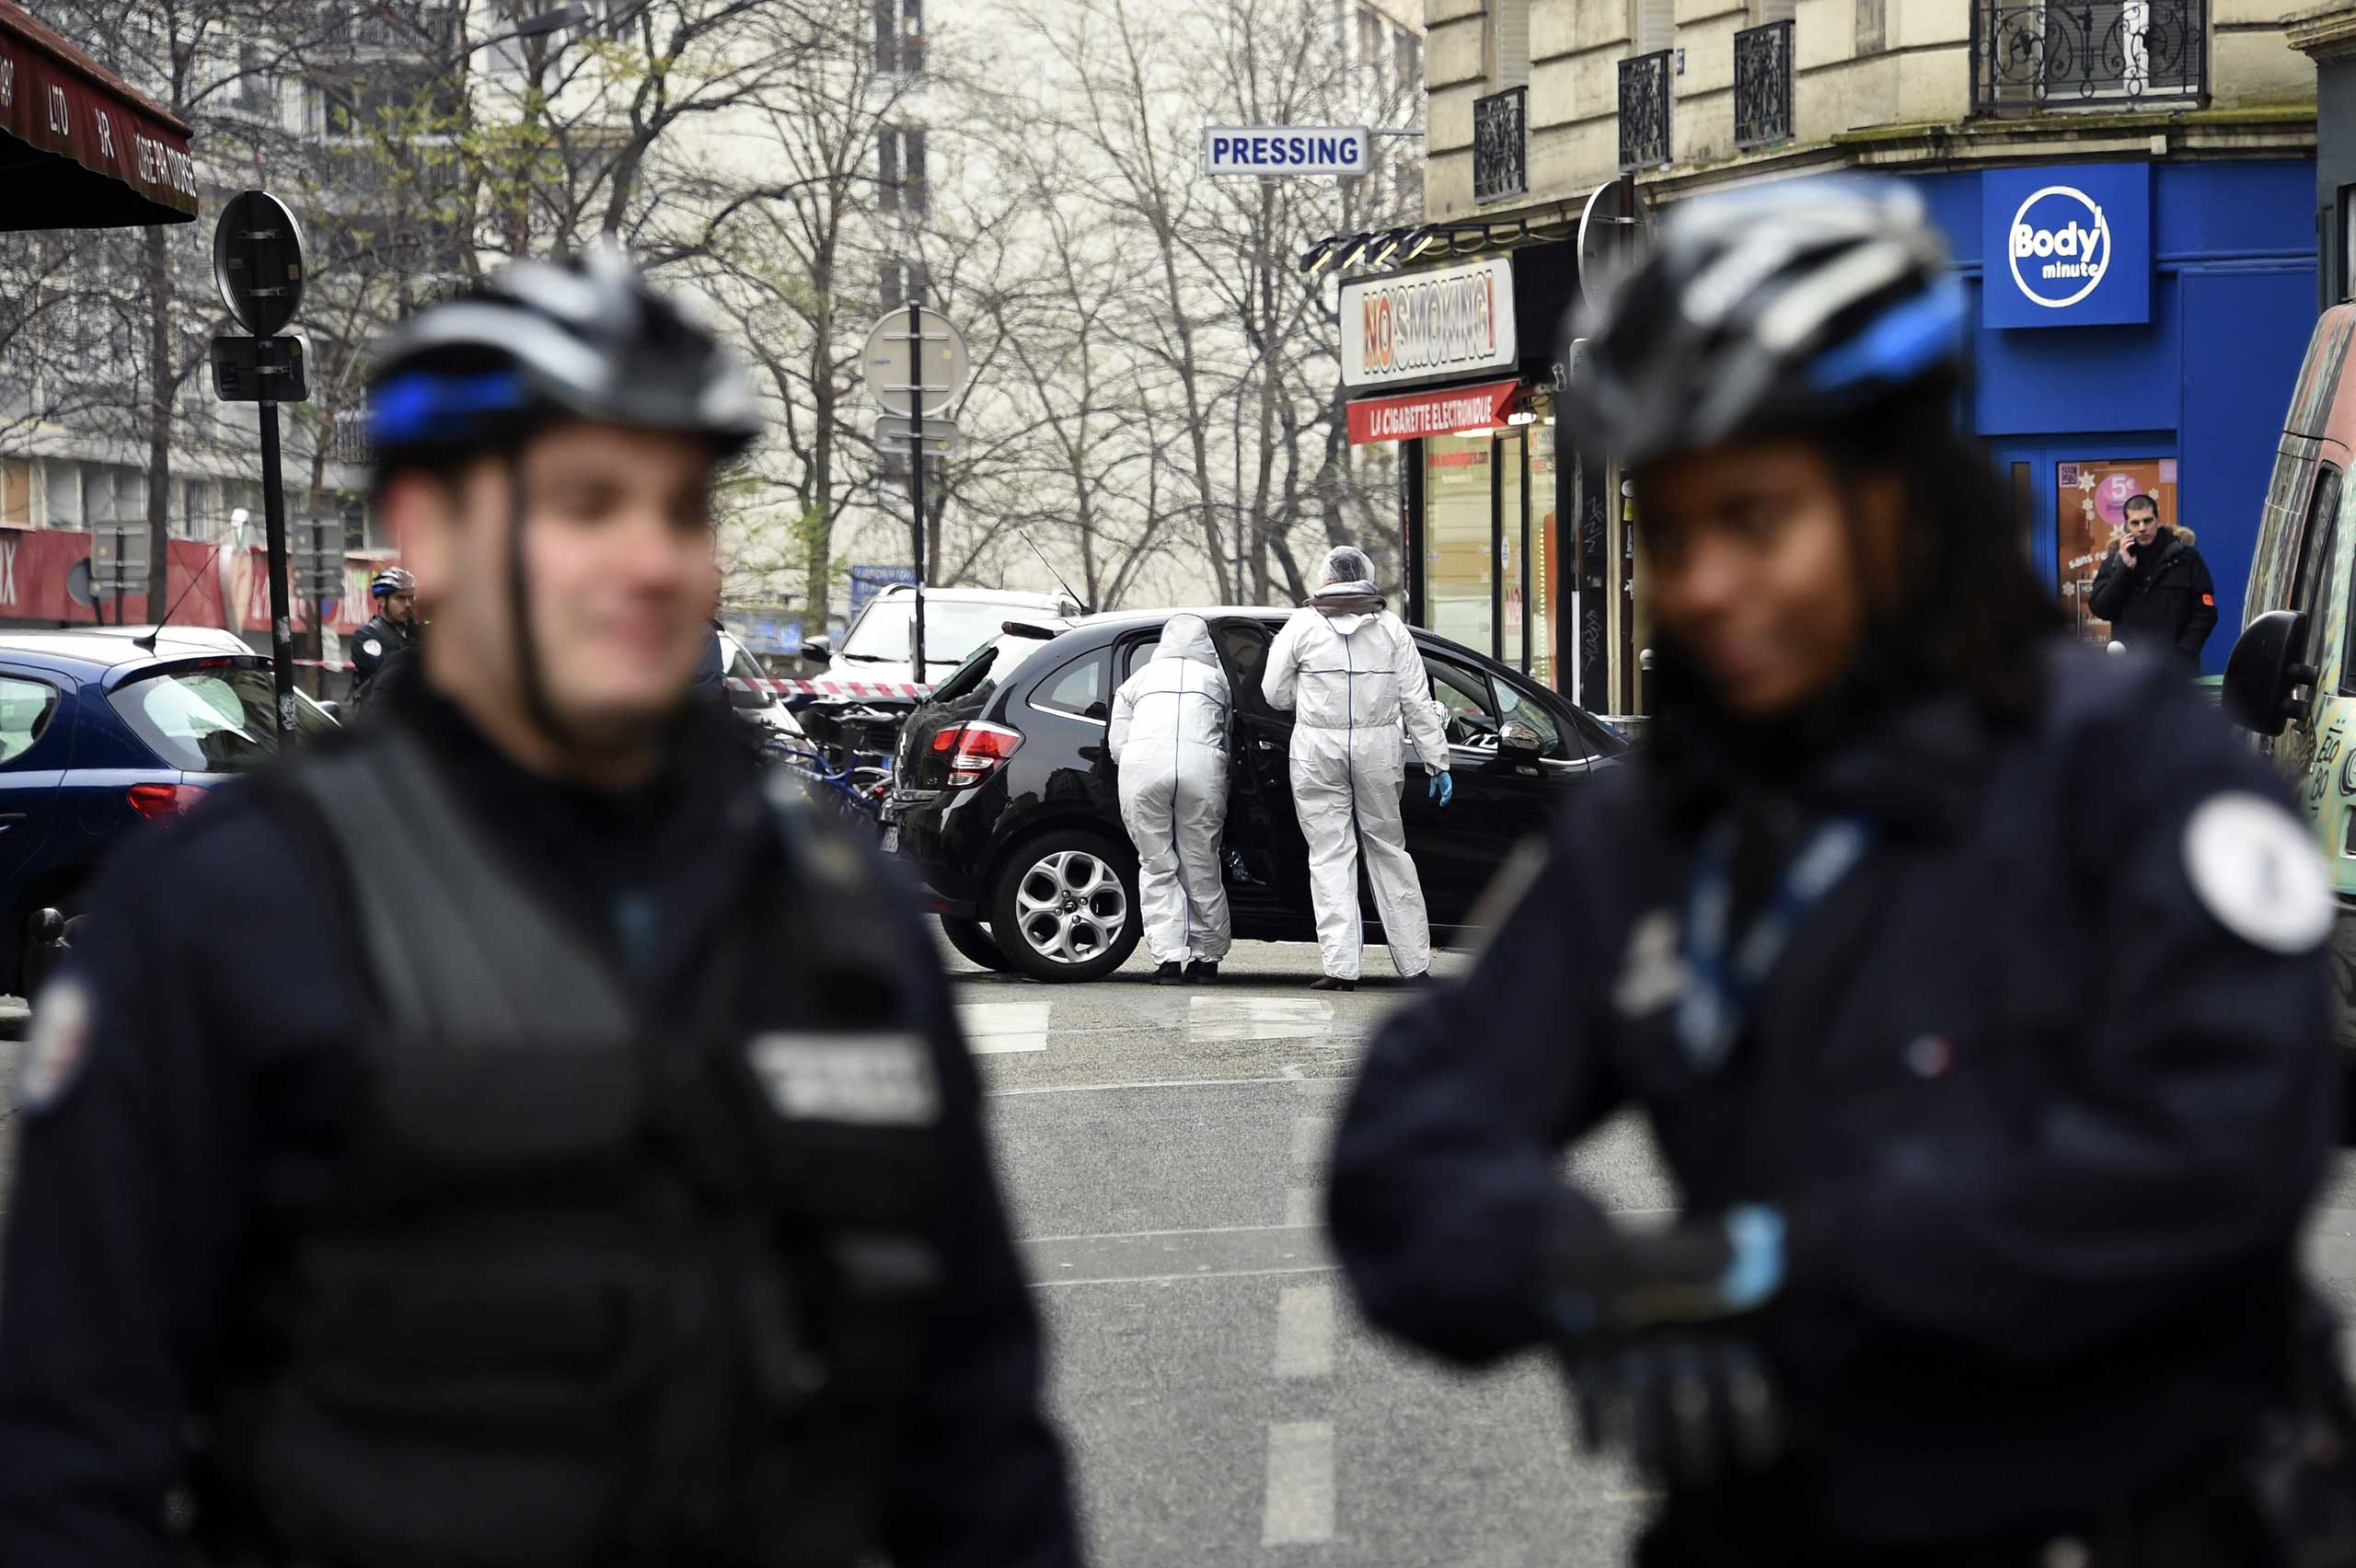 French police officers and forensic experts examine the car used by armed gunmen who stormed the Paris offices of satirical newspaper Charlie Hebdo on Jan. 7, 2015 in Paris. (Domique Faget—AFP/Getty Images)